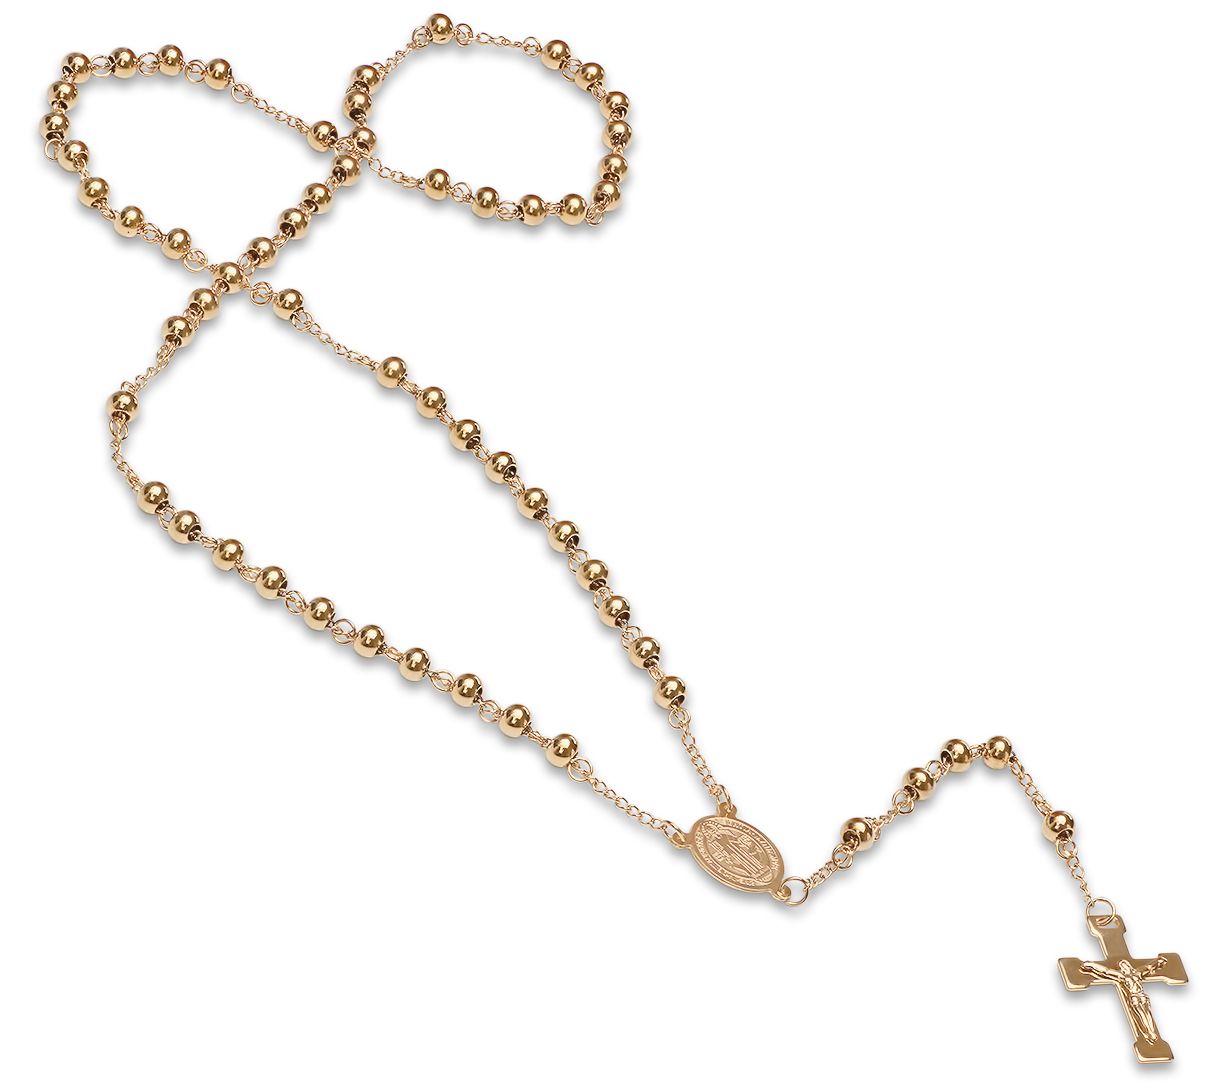 Gold Star Chain for Jewelry Making, 14K Gold Star Rosary Chain